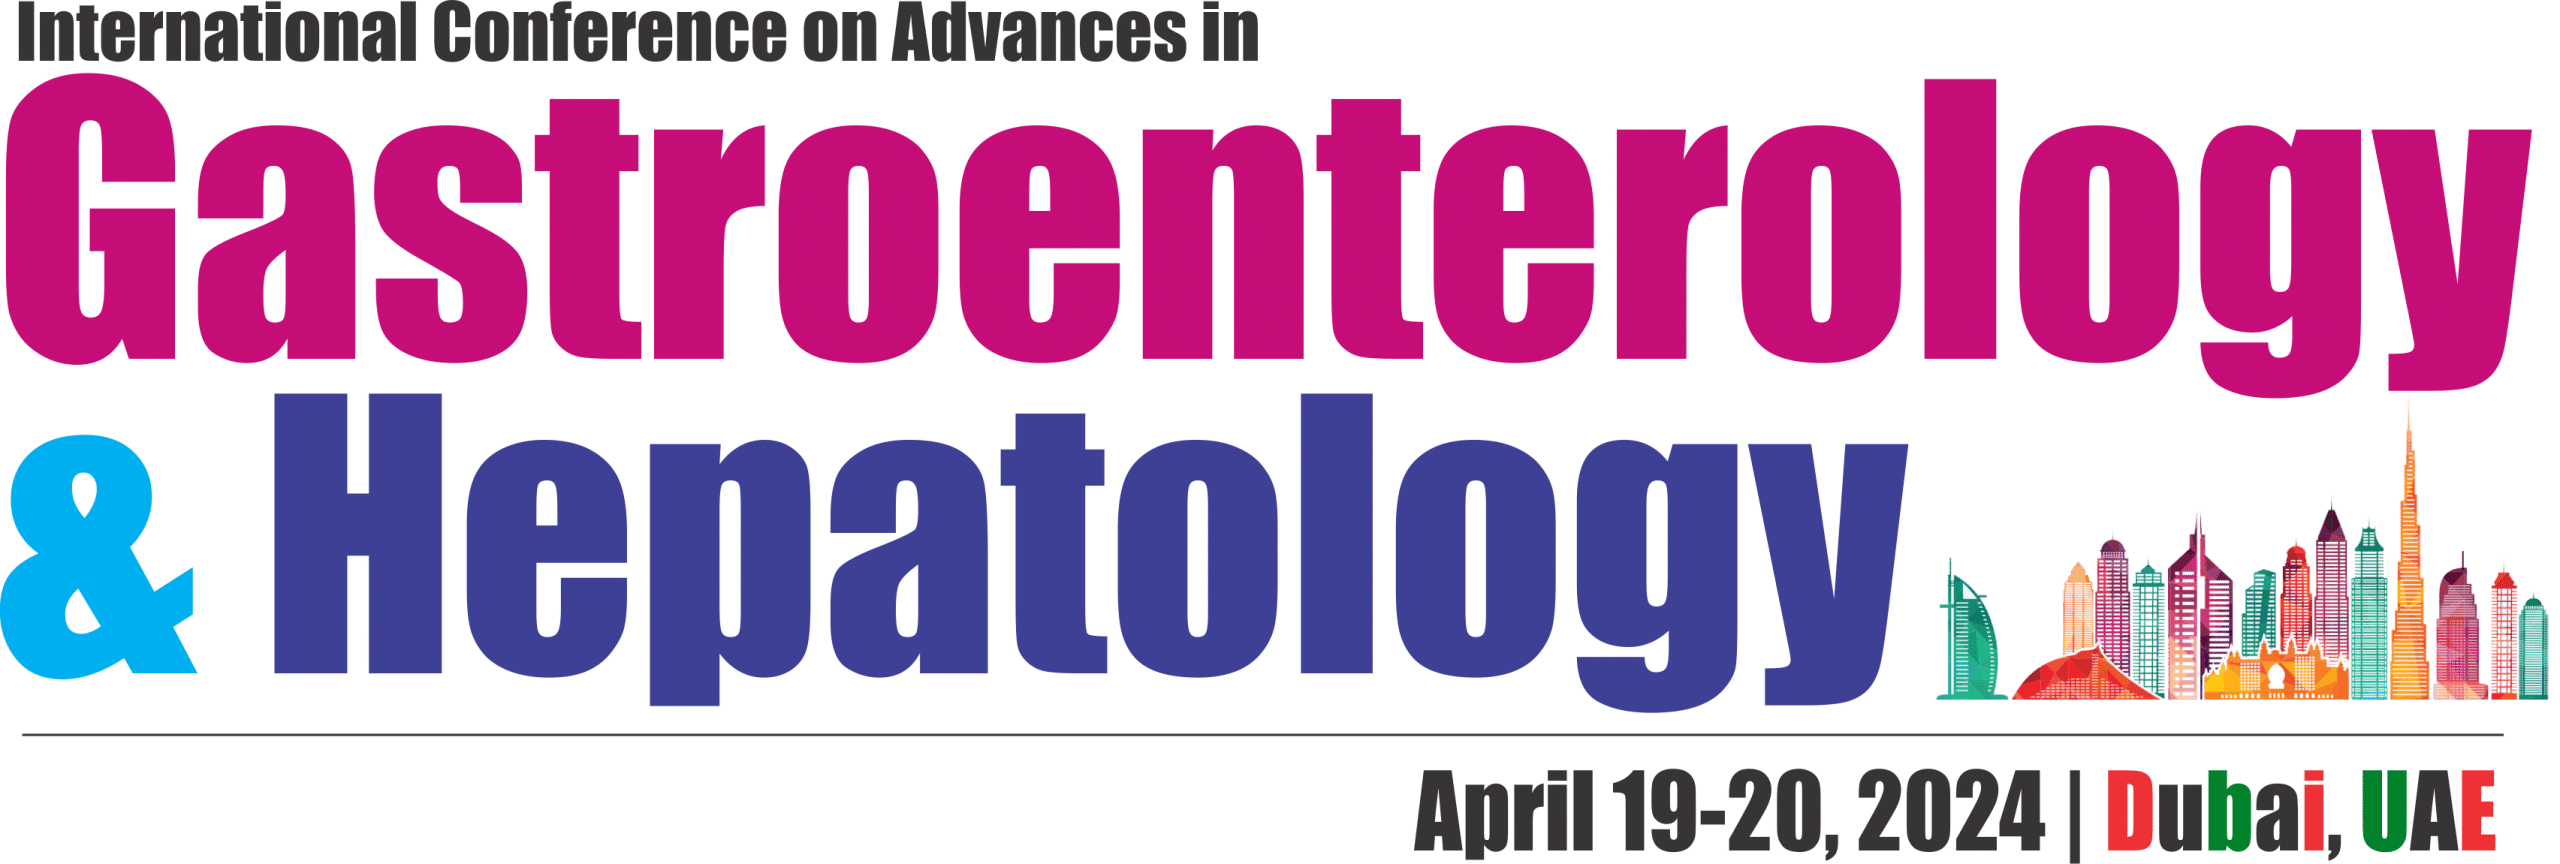 International Conference on Advances in Gastroenterology and Hepatology